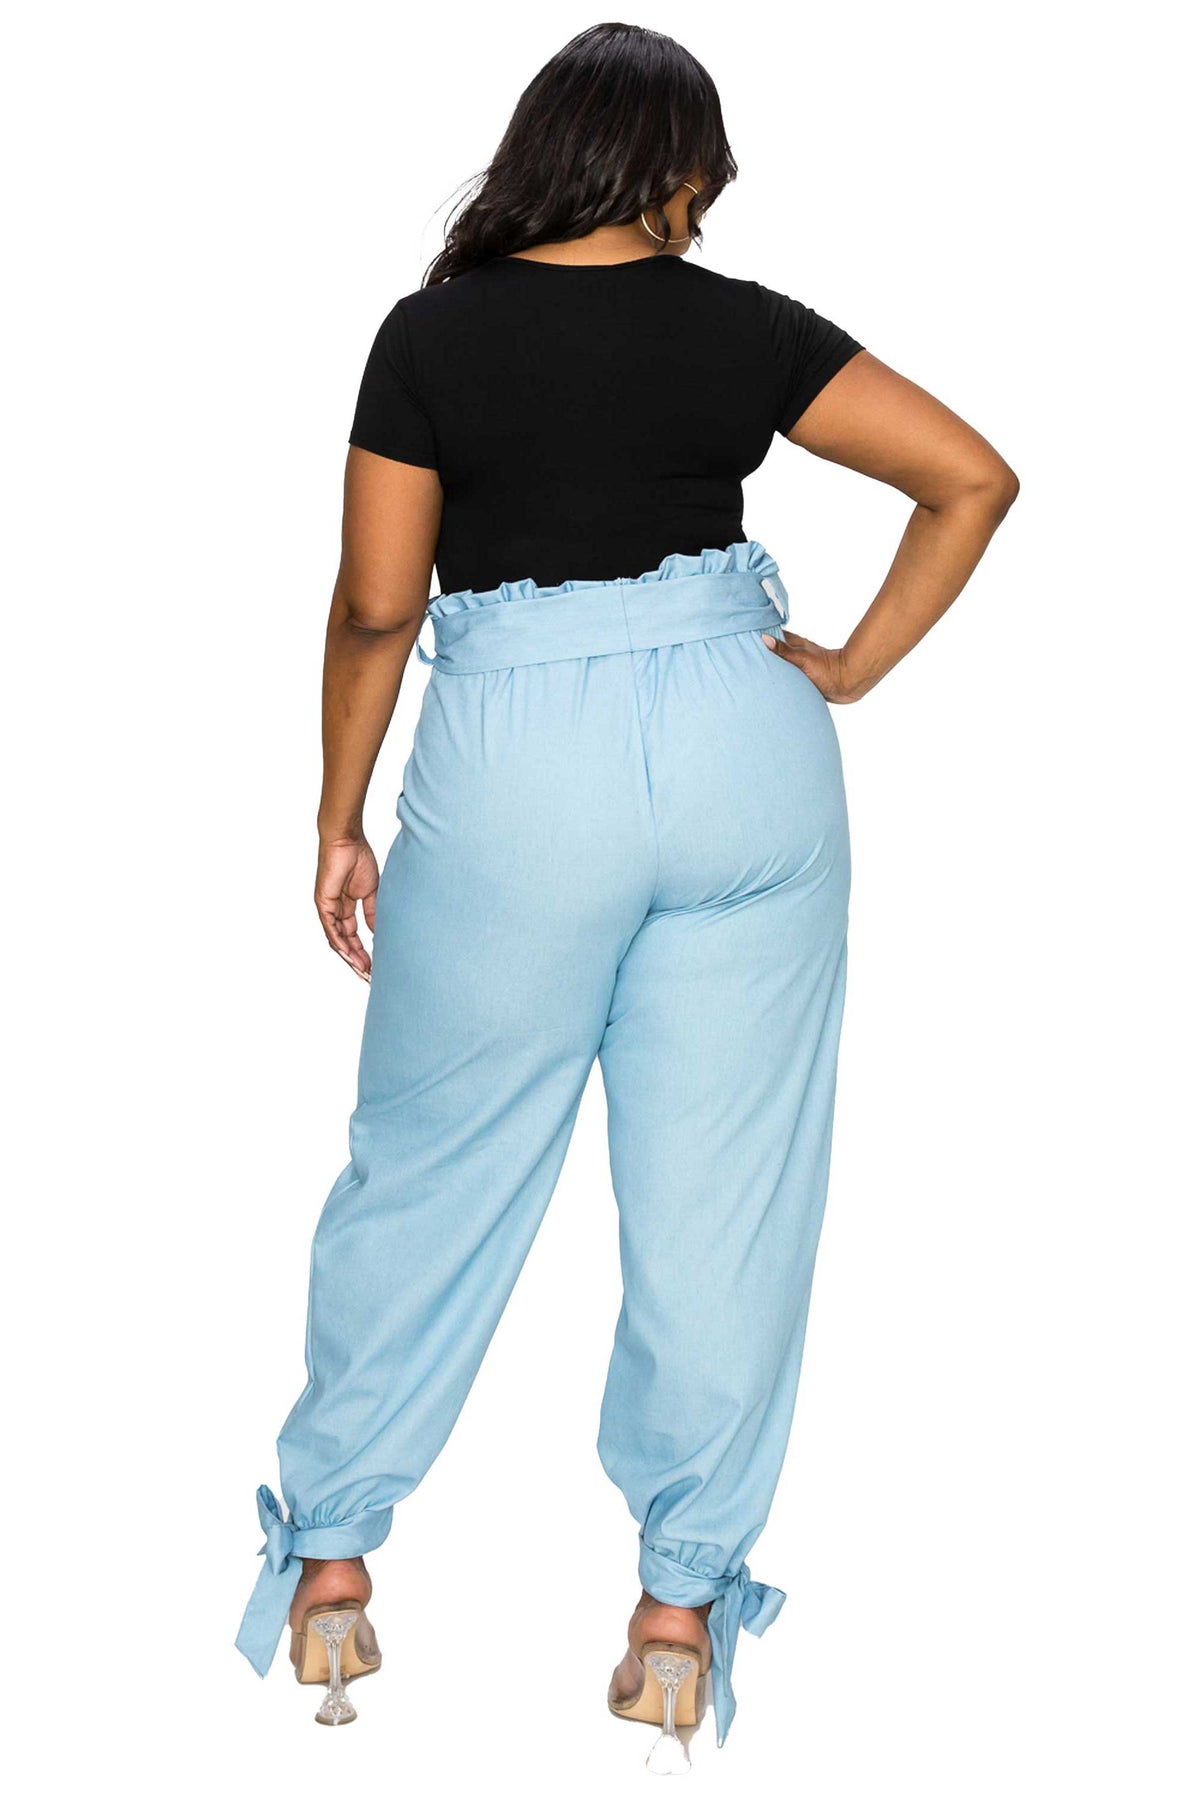 livd apparel plus size boutique contemporary paperbag denim pants with waist tie and leg cuff ribbons in light blue